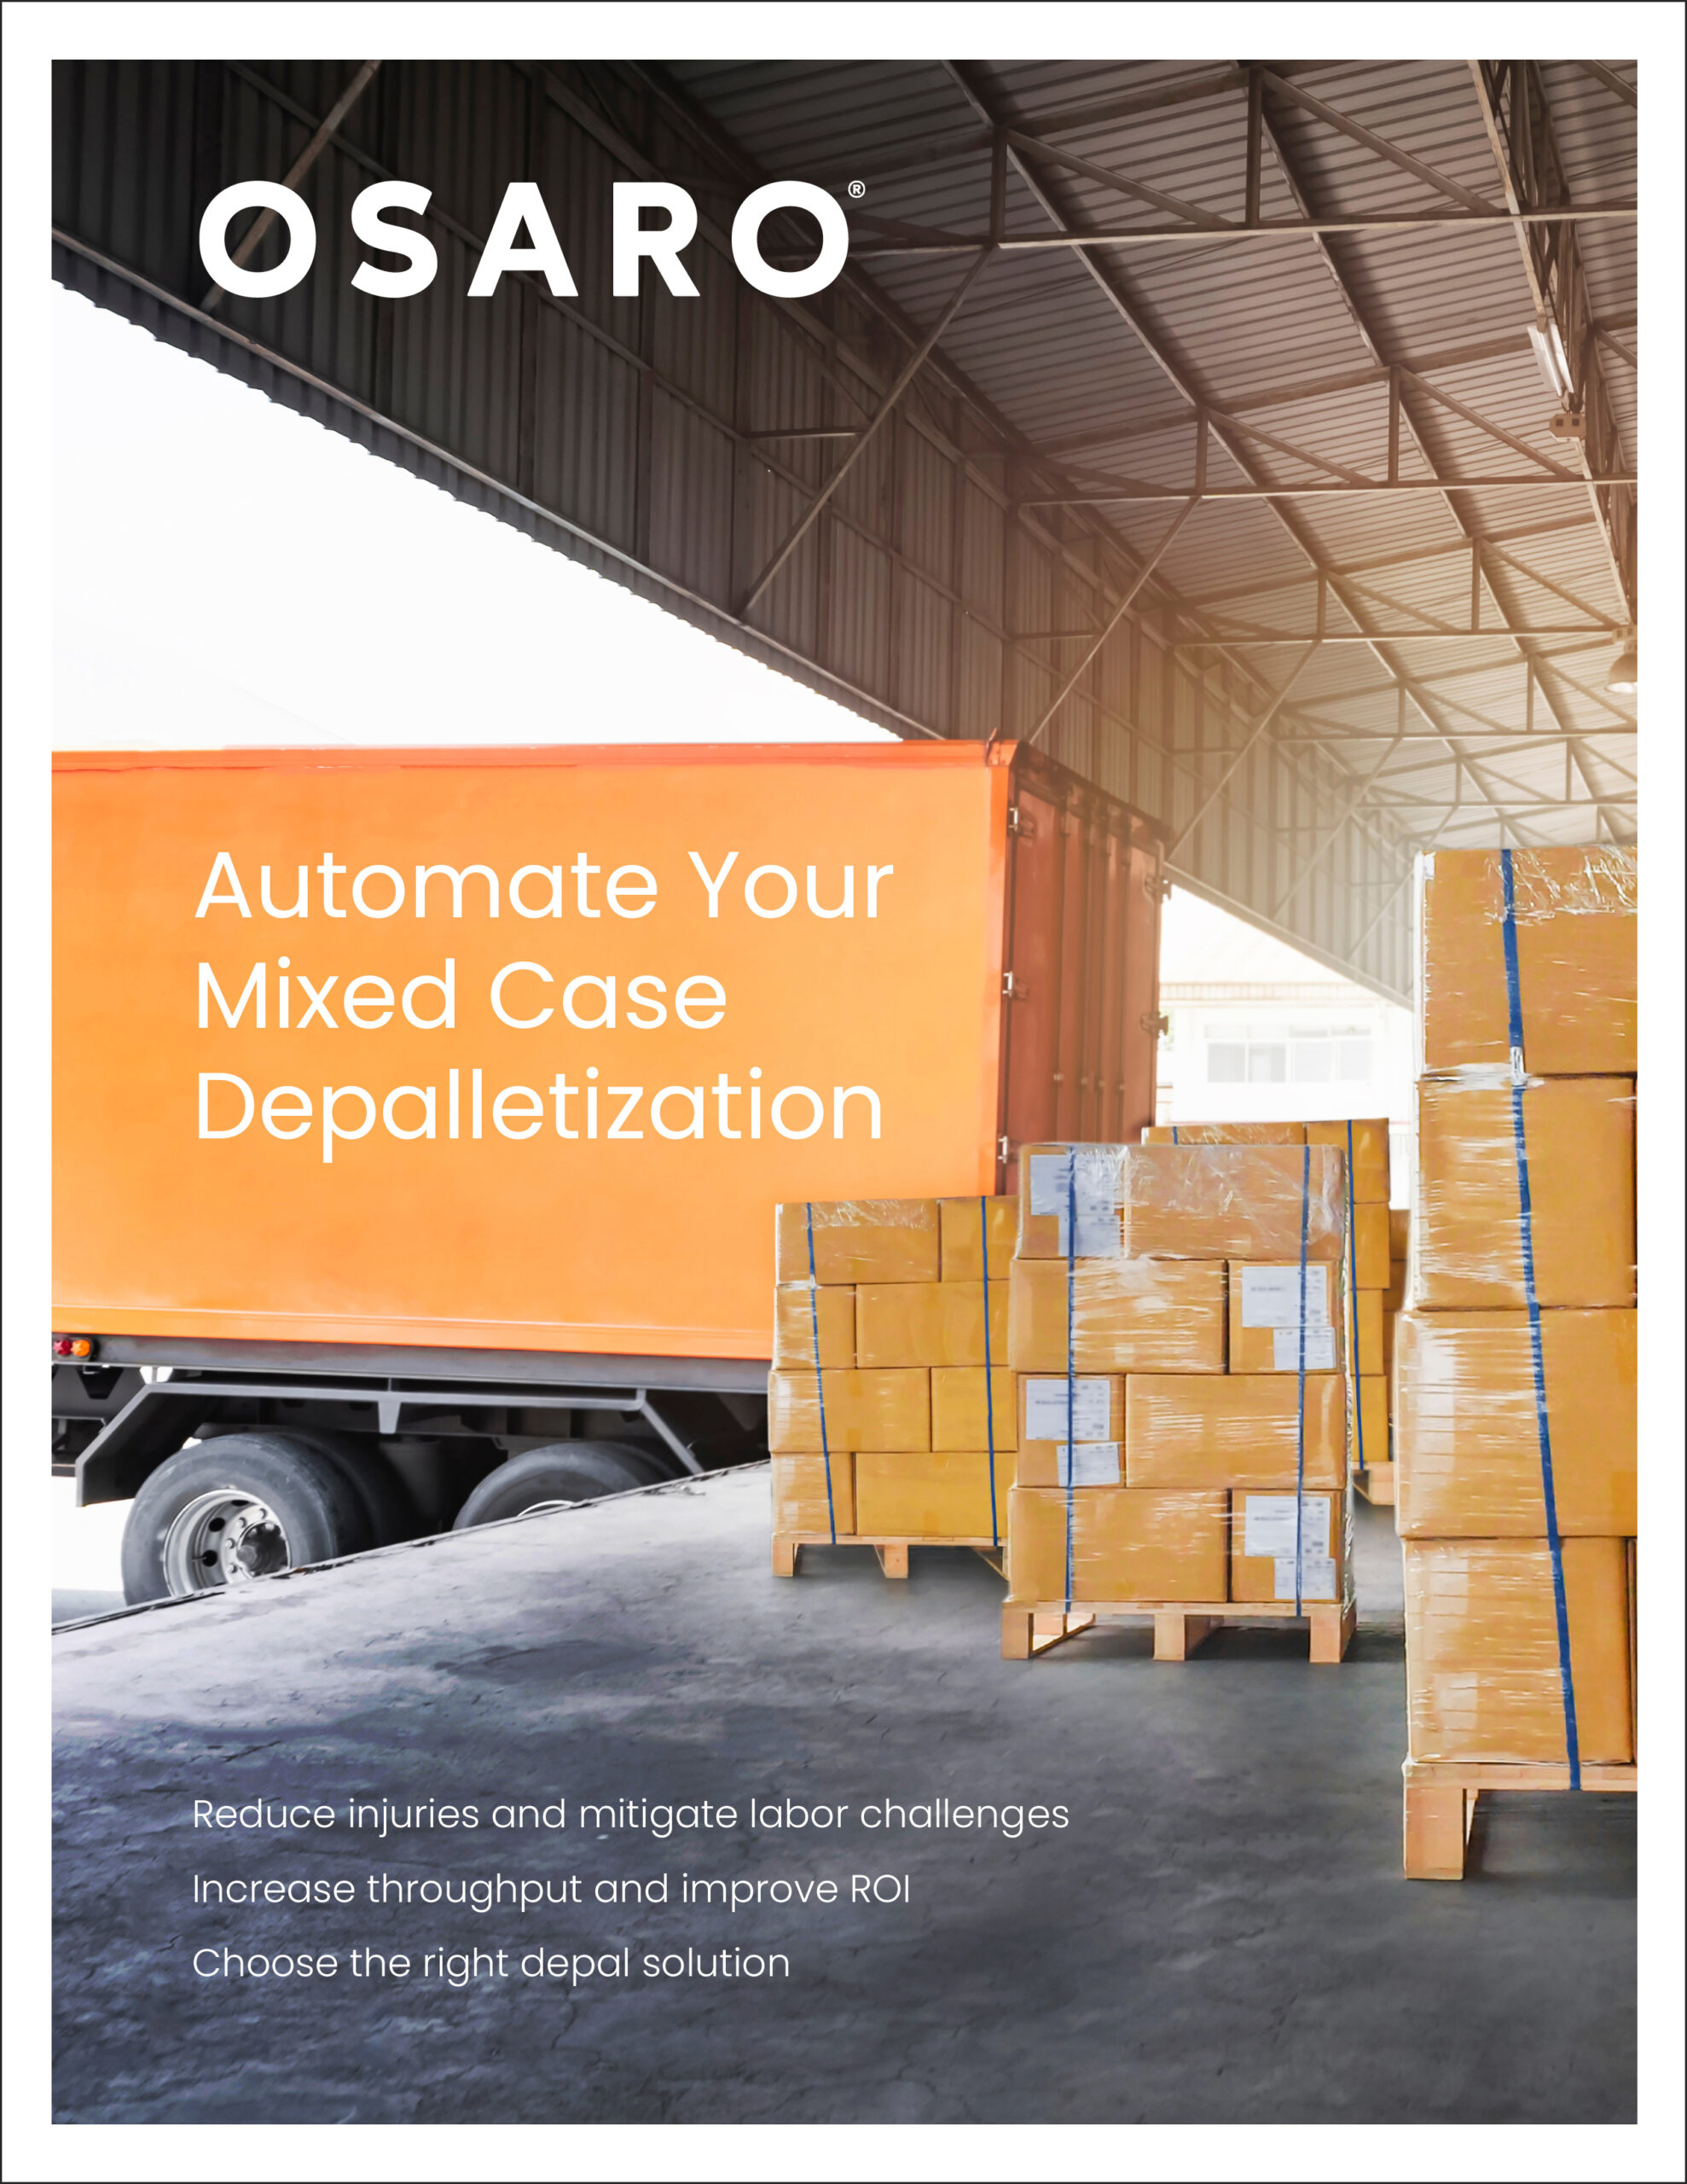 Automate Your Mixed Case Depalletization